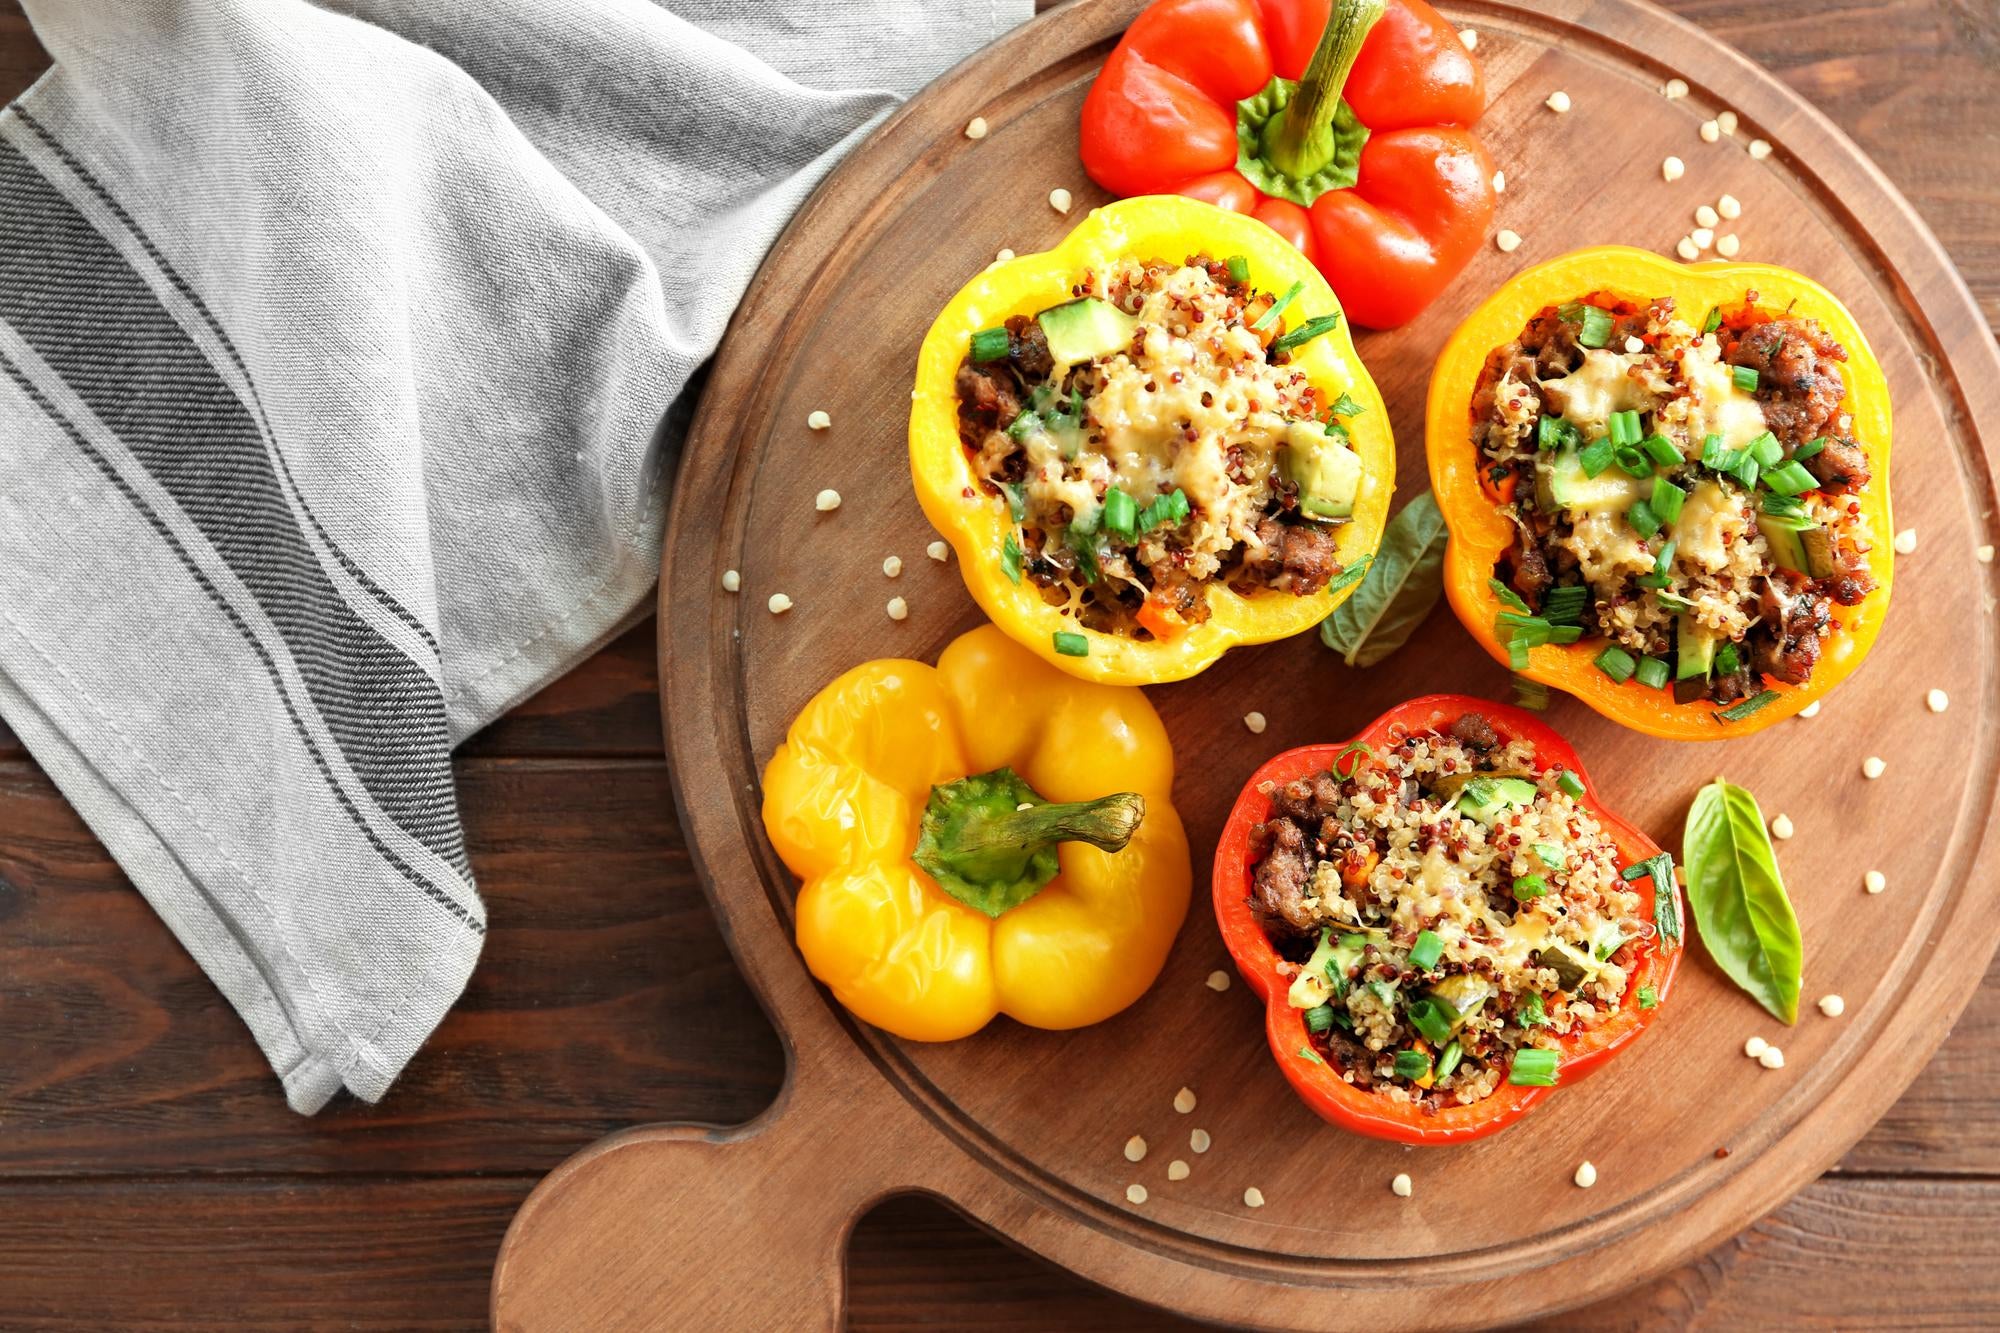 Amaranth-Stuffed Peppers: A Nutritious and Delicious Dinner